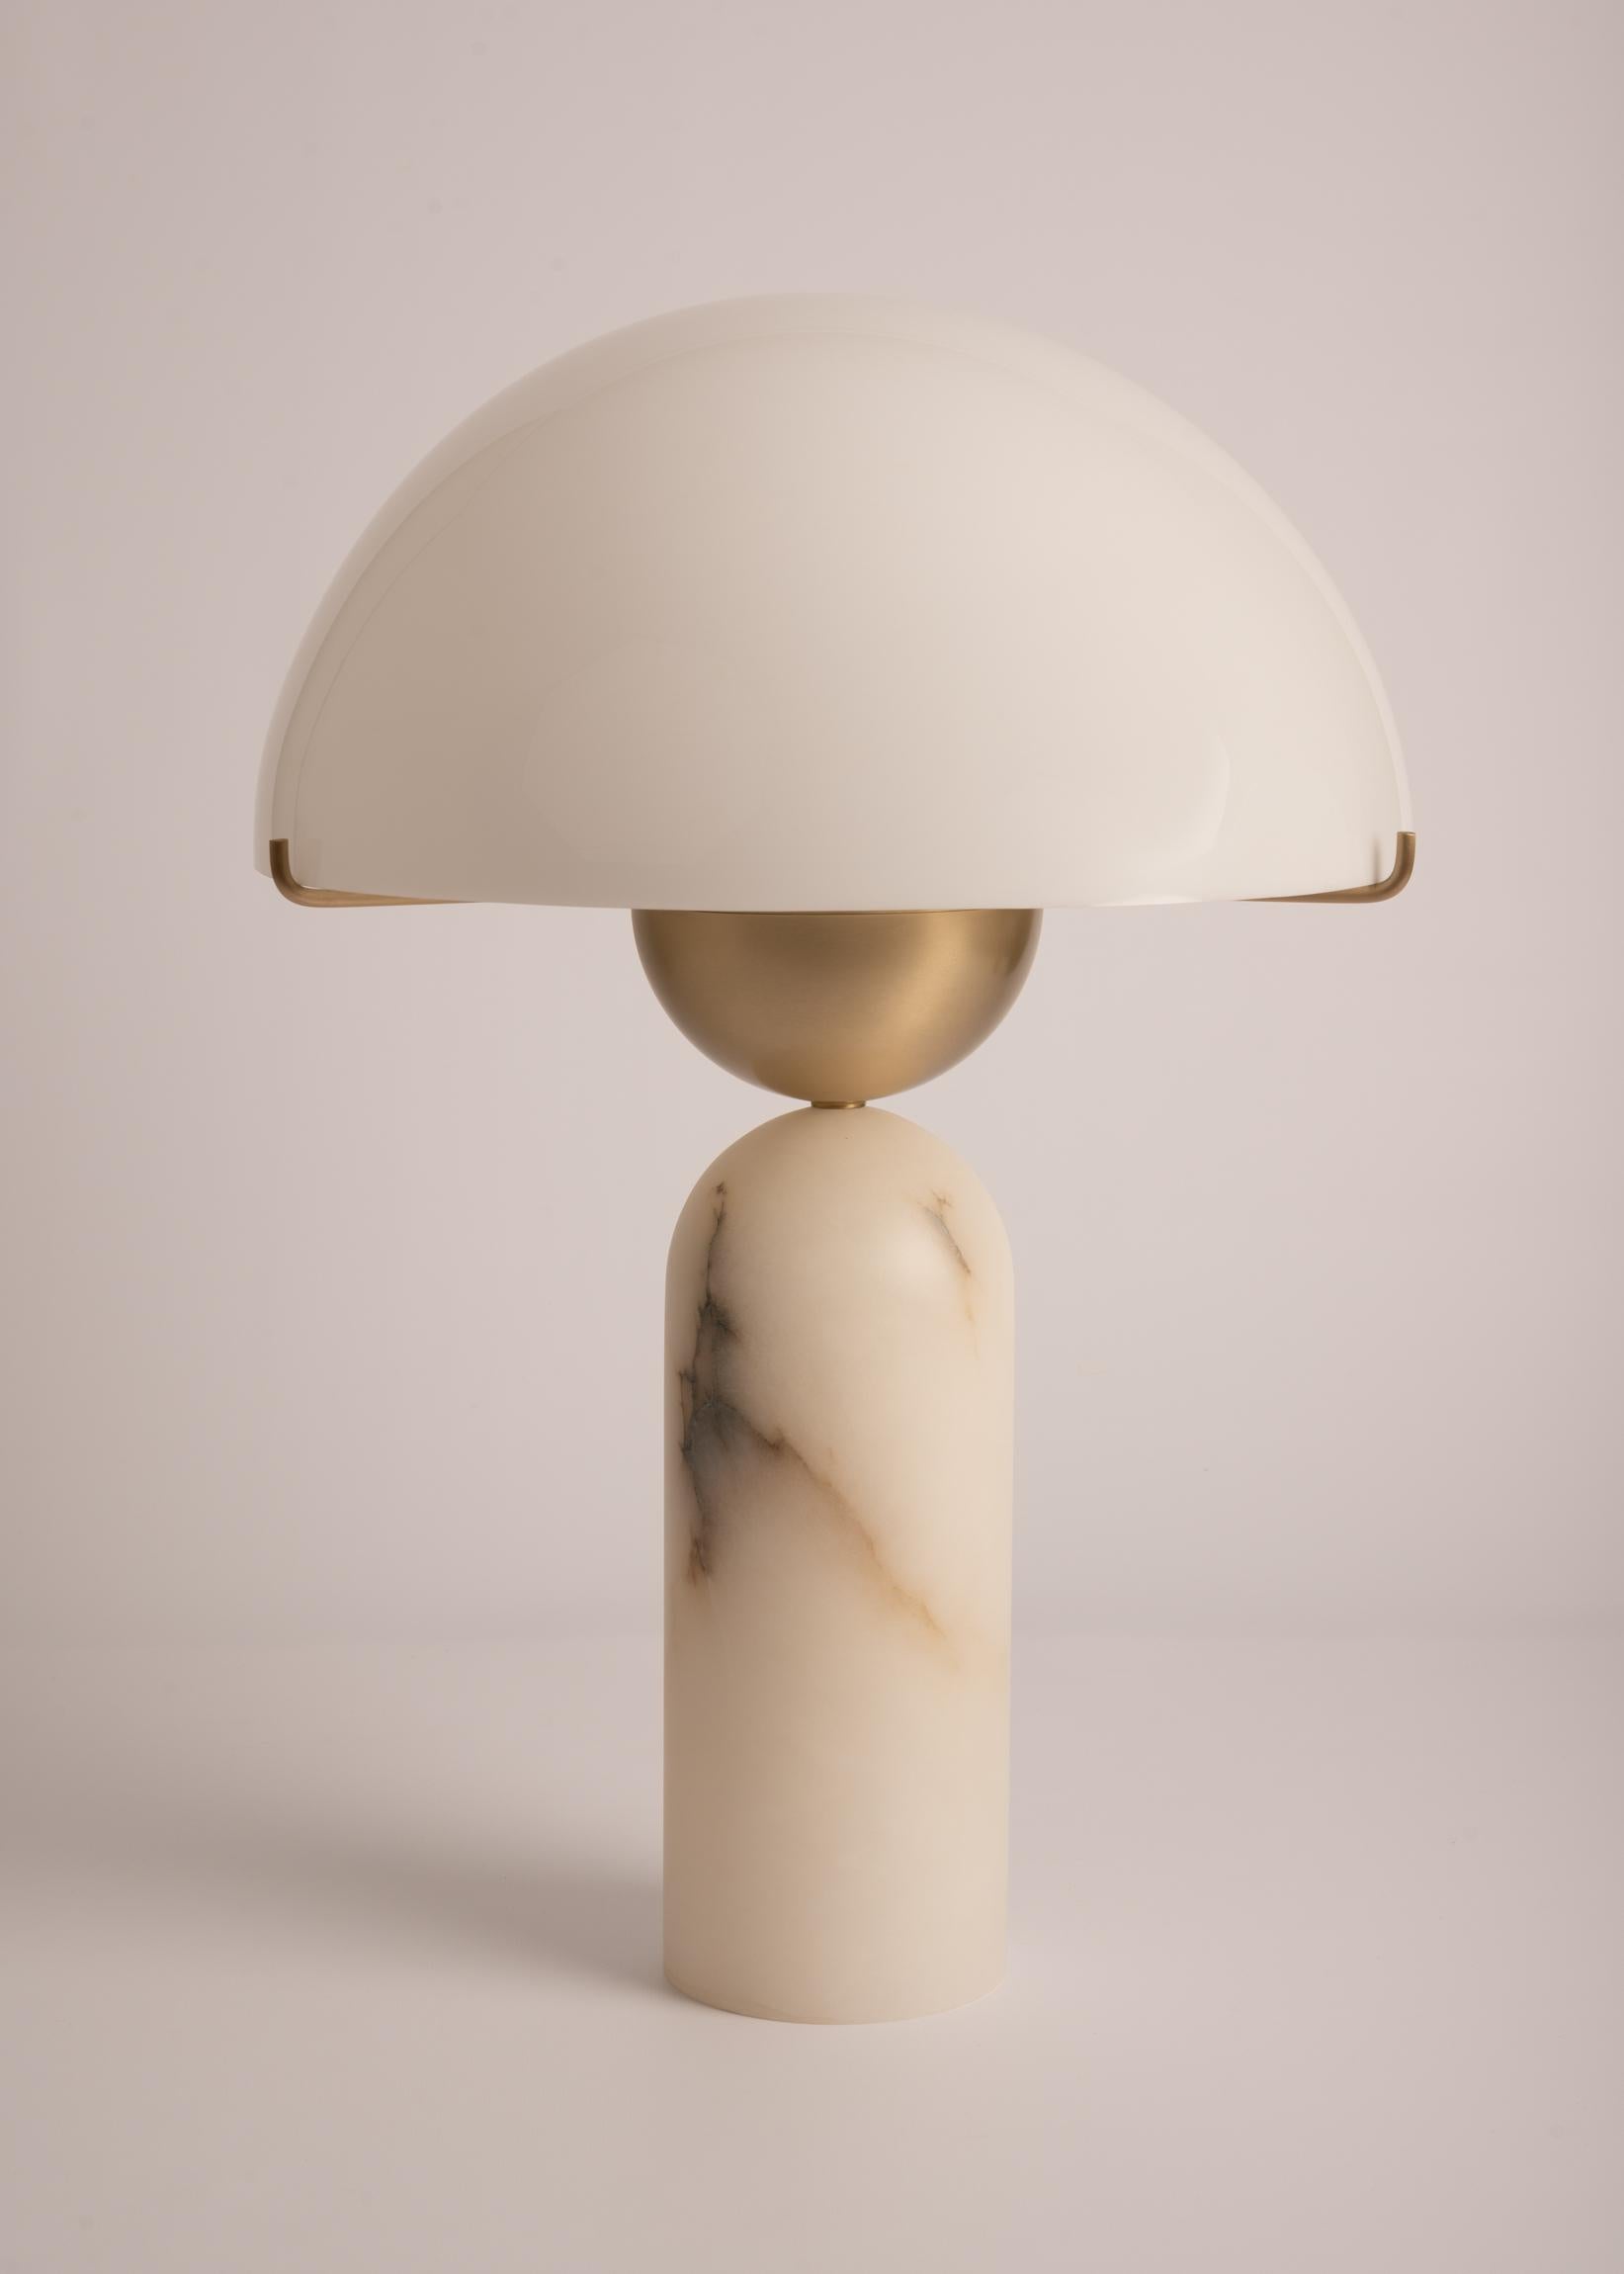 White Alabaster Peono Table Lamp by Simone & Marcel
Dimensions: Ø 40.6 x H 56 cm.
Materials: Brass, acrylic and white alabaster.

Also available in different marble, wood and alabaster options and finishes. Custom options available on request.